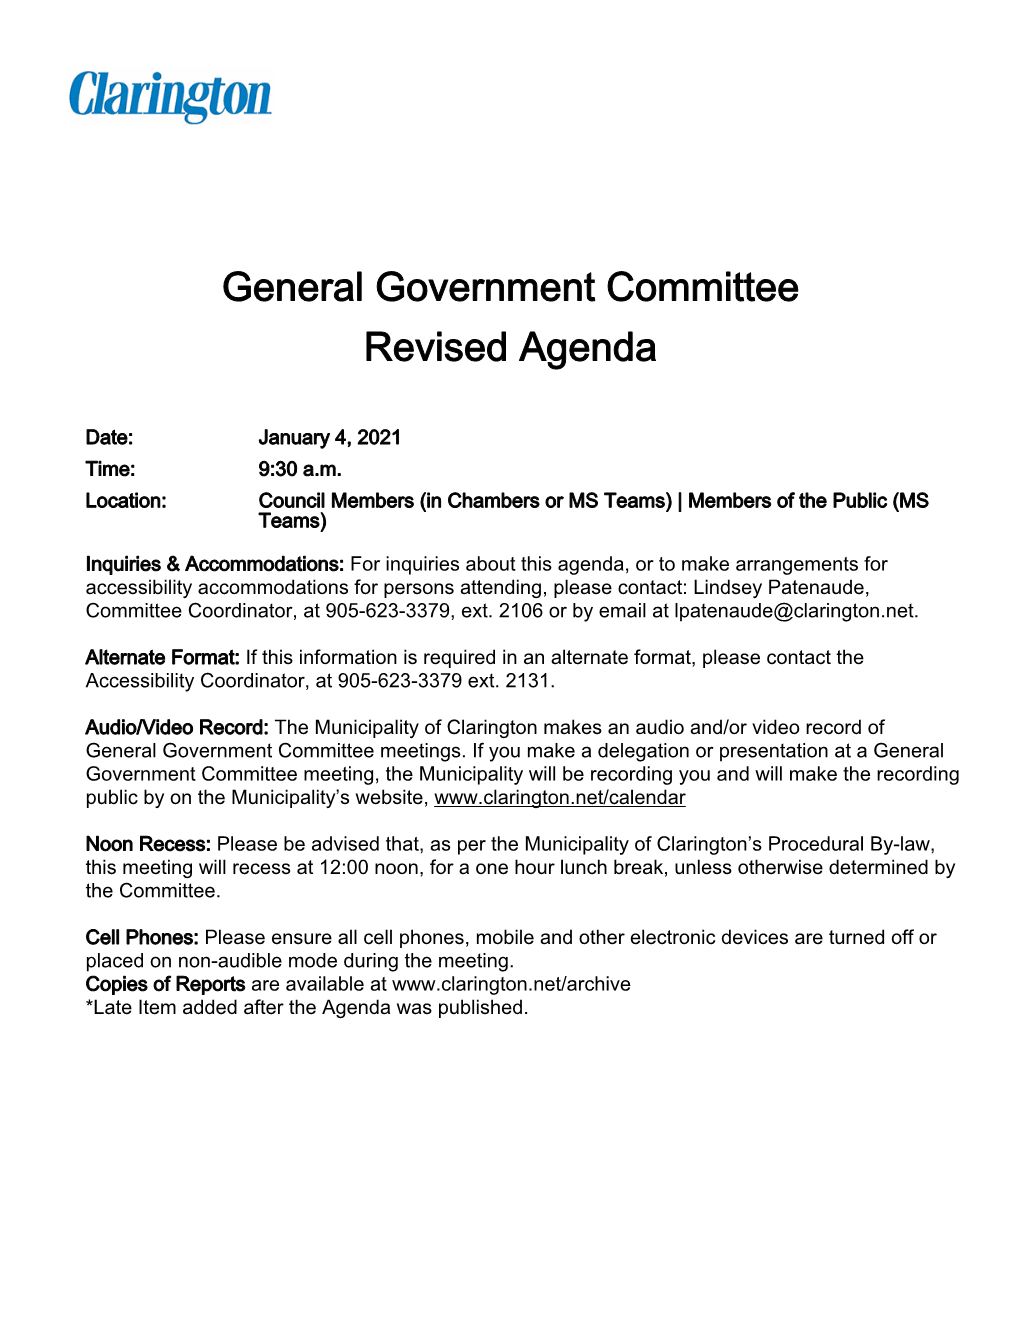 General Government Committee Revised Agenda